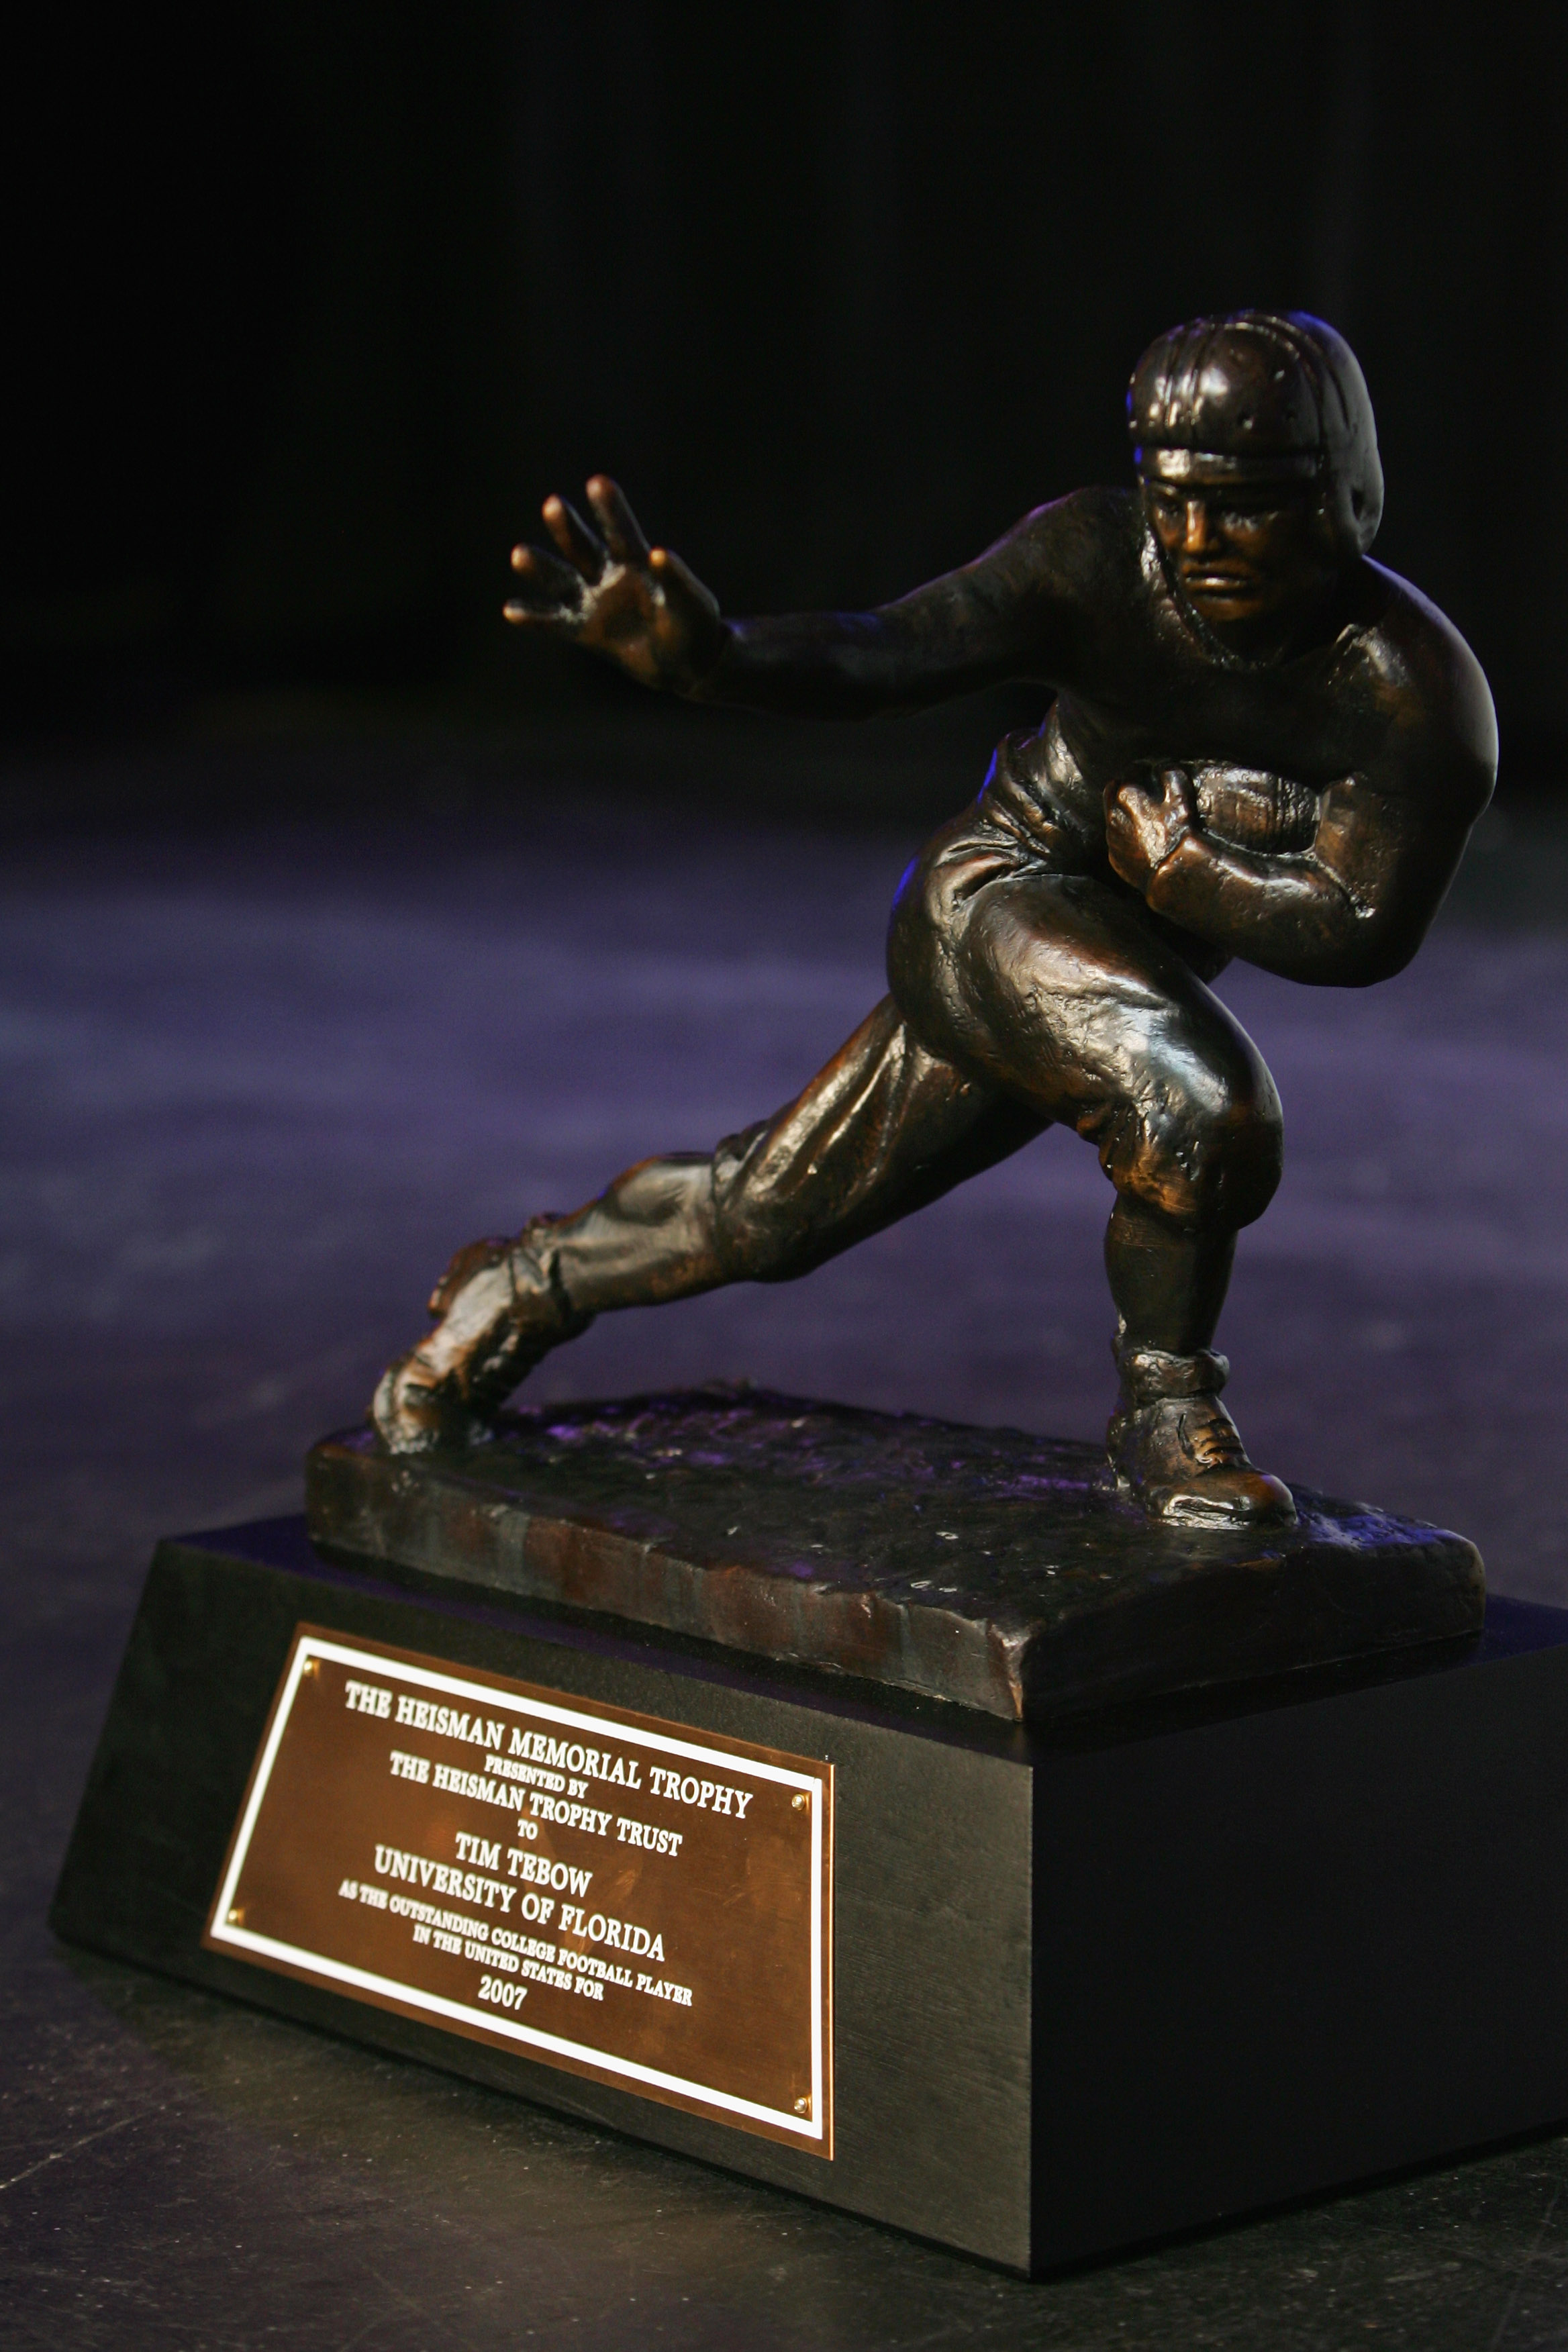 NEW YORK - DECEMBER 08: The Heisman trophy after the 73rd Annual Heisman Memorial Trophy Award on December 8, 2007 in New York City.  (Photo by Chris Trotman/Getty Images)